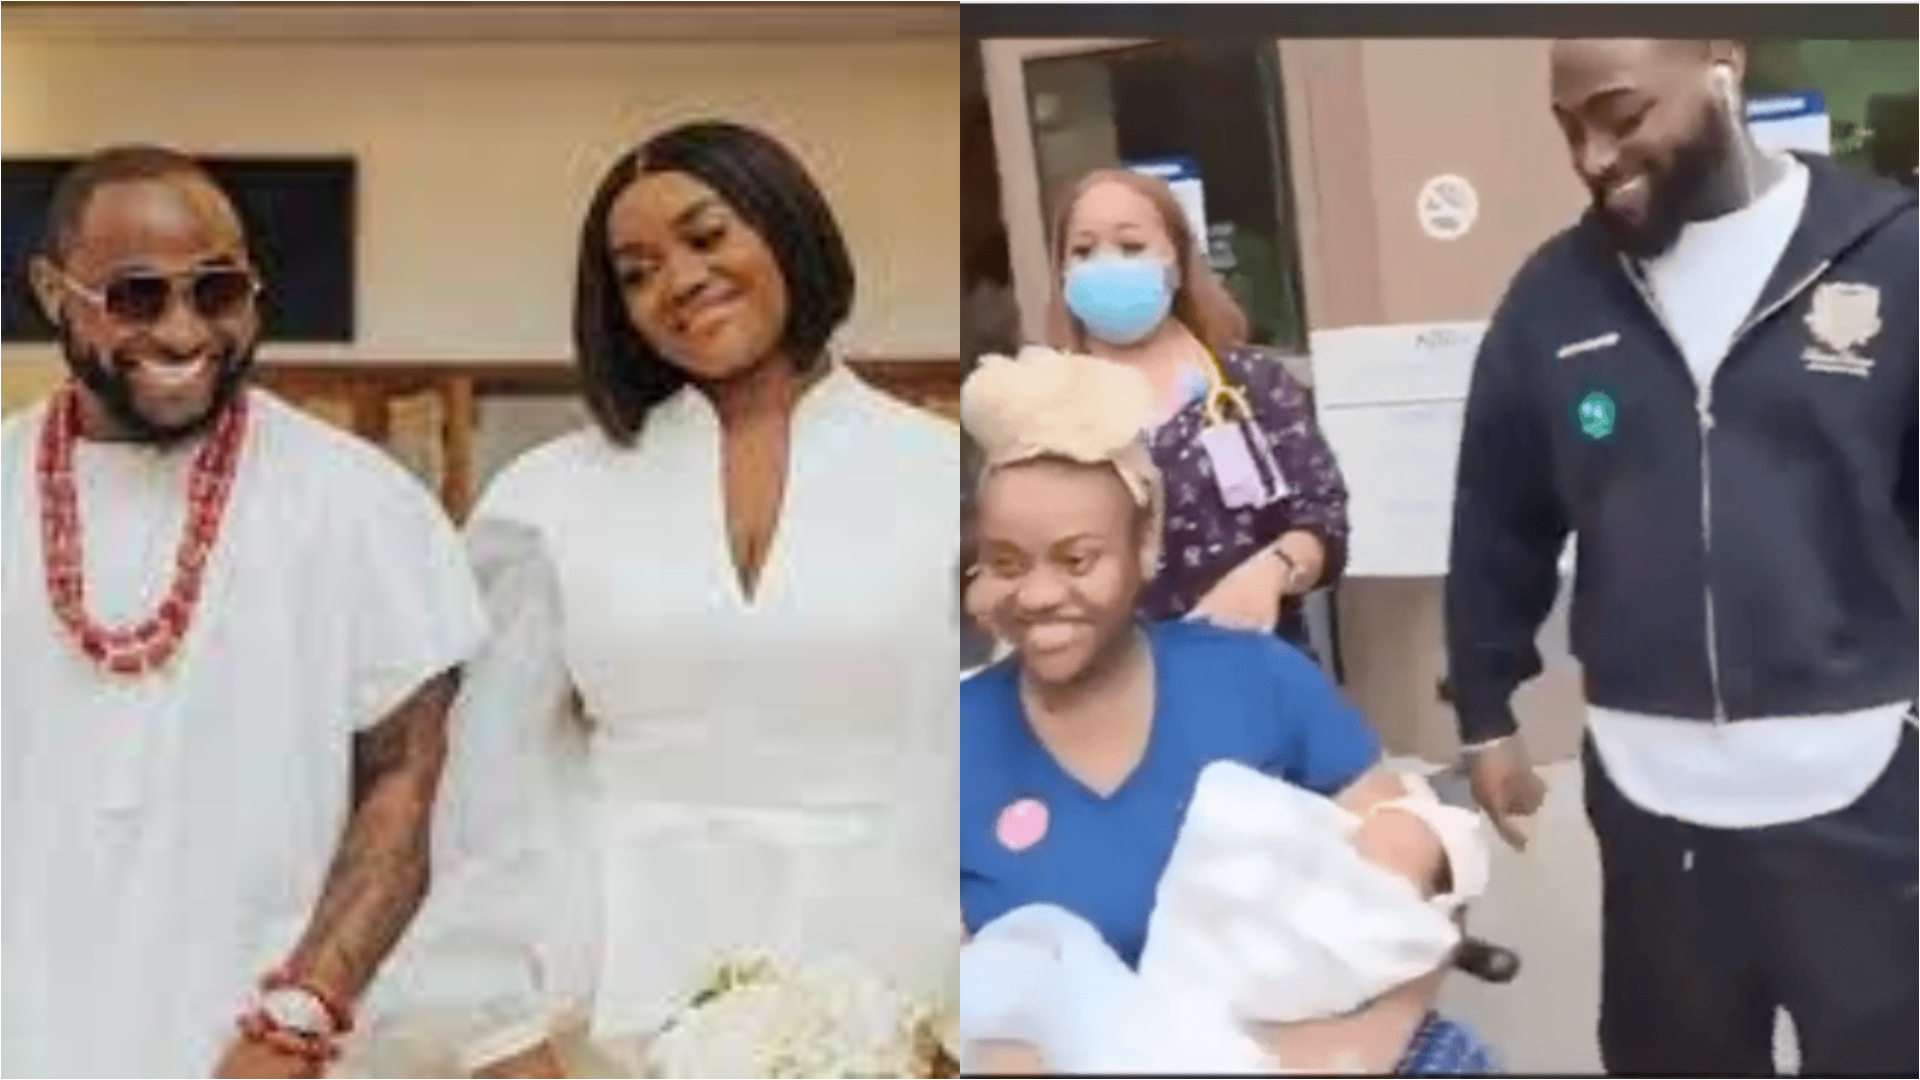 Afrobeats singer, David Adeleke, popularly known as Davido has recently welcomed  The world-famous Nigerian music star, David Adeleke, who is better known as Davido, recently welcomed a set of twins with his wife, Chioma. The elated dad has now revealed how he was filled with joy when he was told that his wife was expecting two children. In an interview, the music star who lost, Ifeanyi, his first child with Chioma, last October, described how he and his wife felt upon hearing the news that twin bundle of joy would be added to their family.